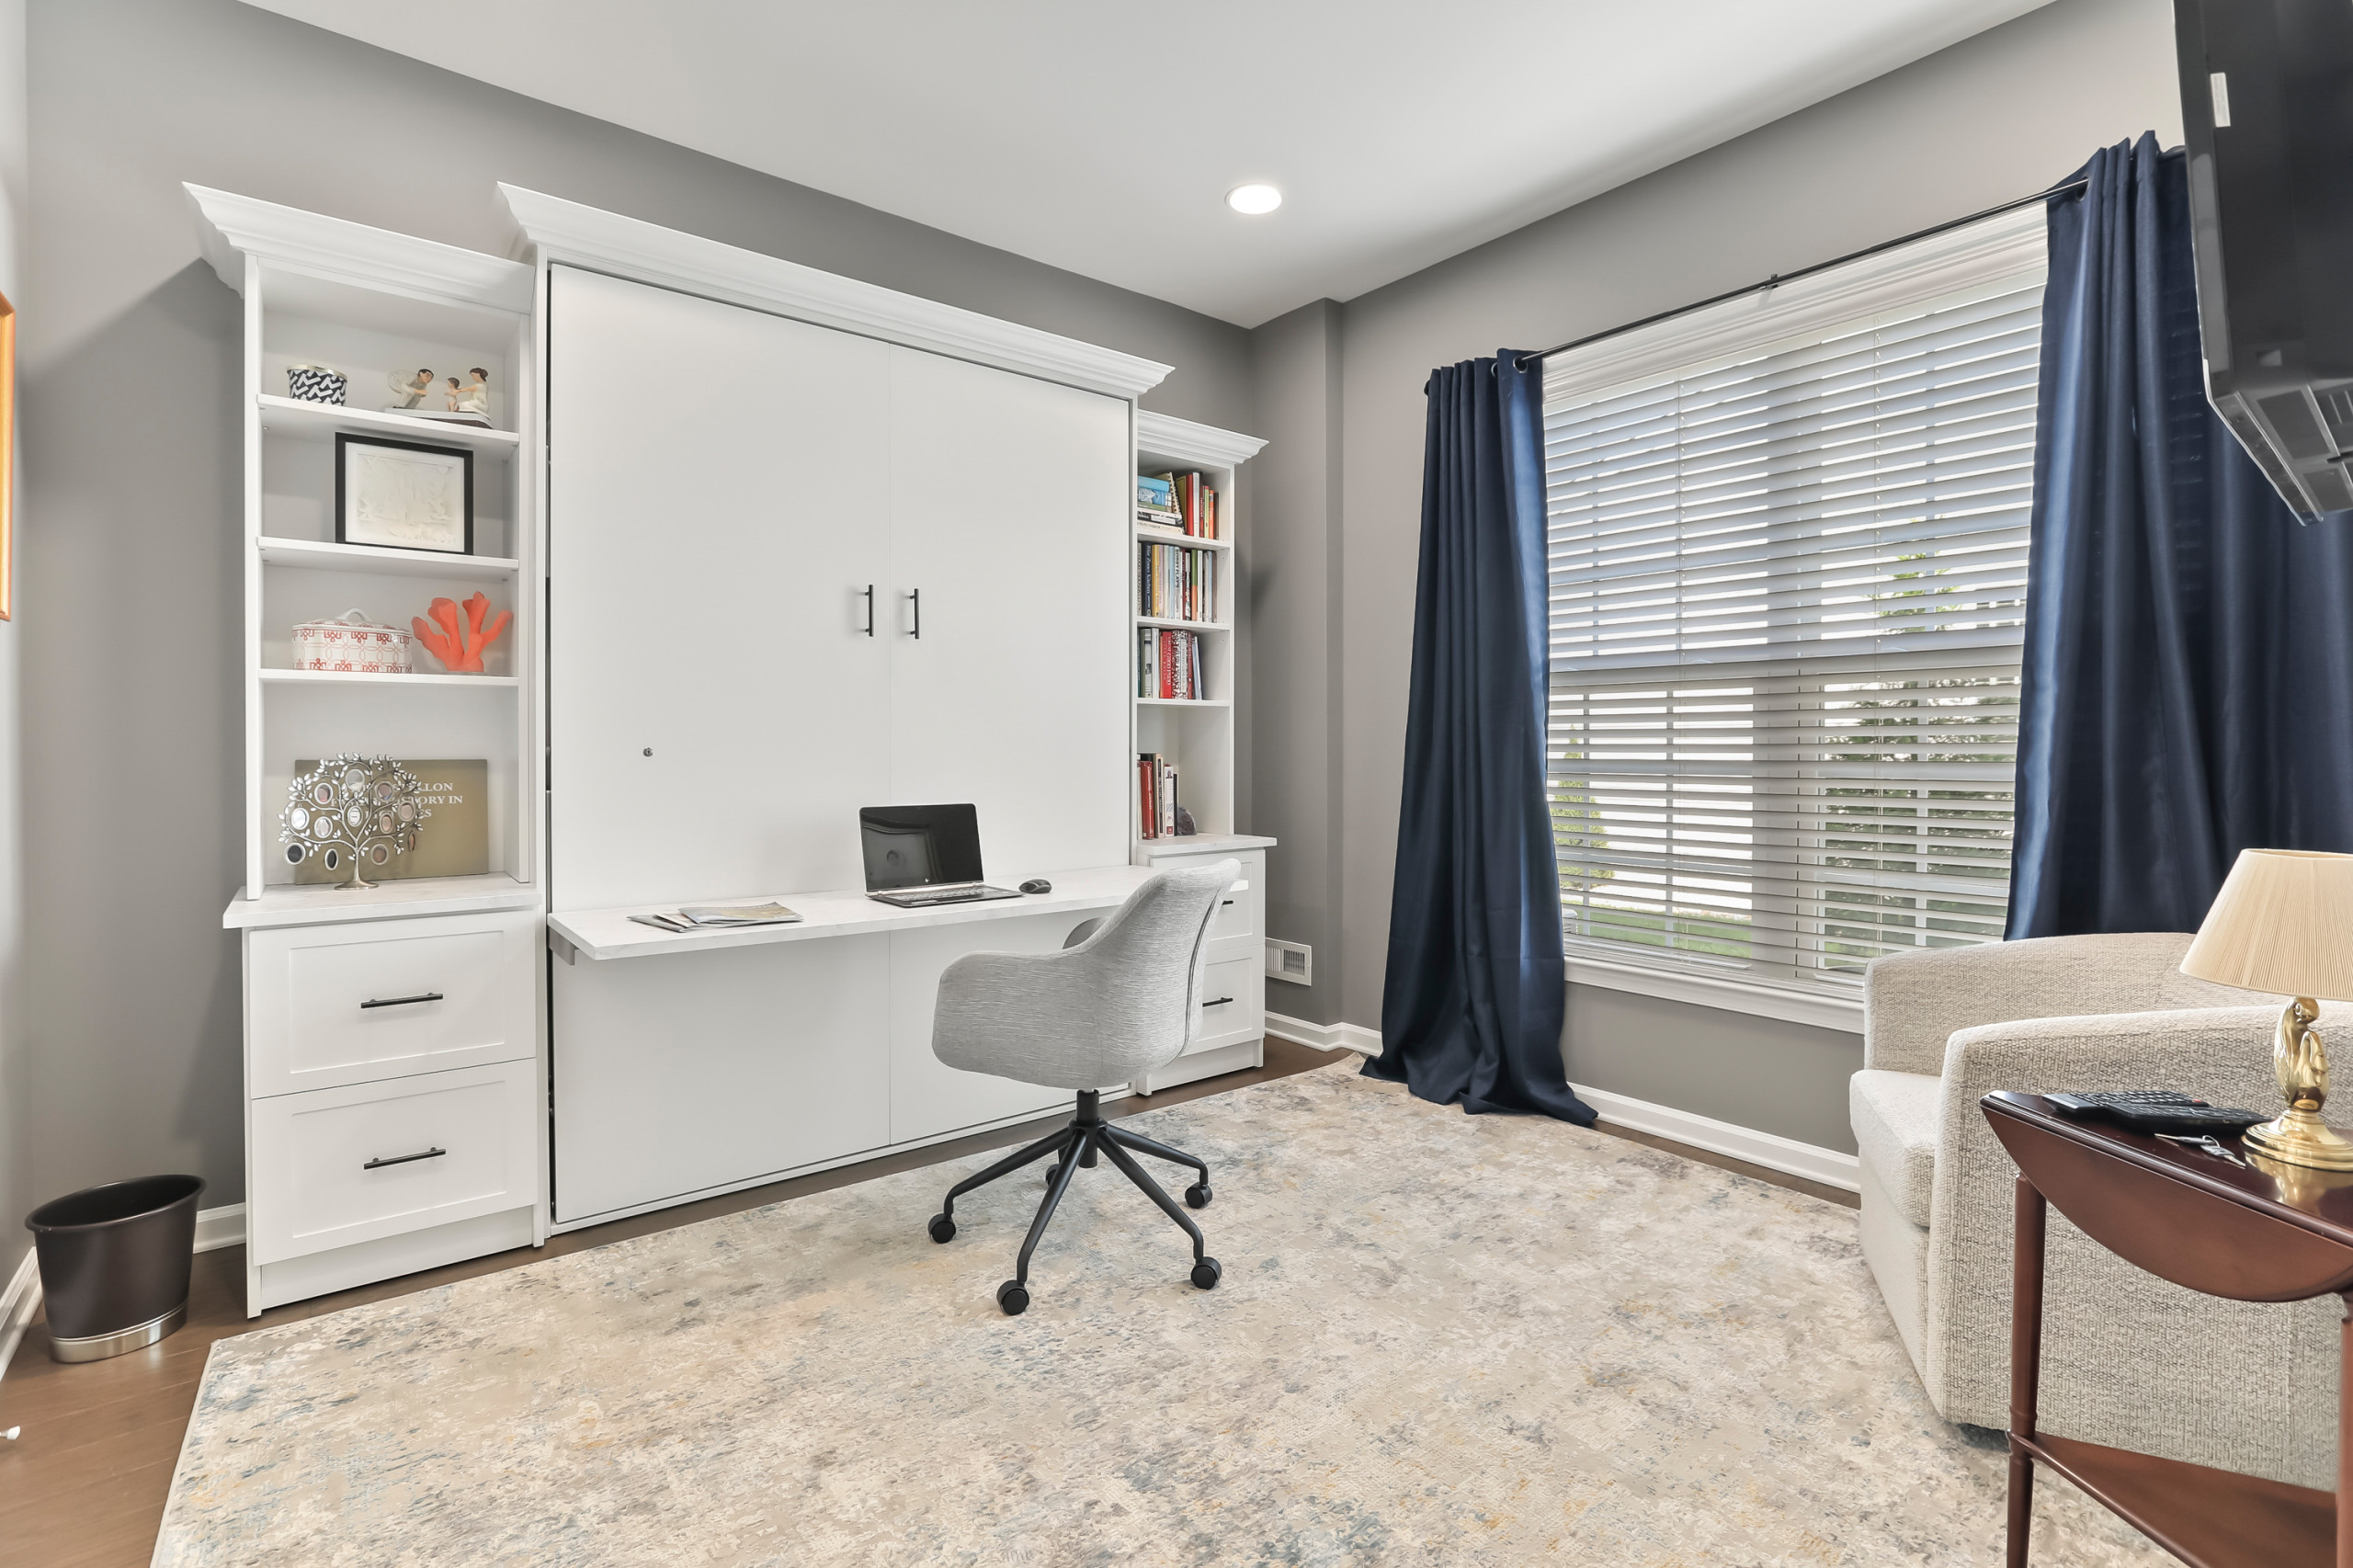 Home Office with Murphy Bed/Desk Configuration